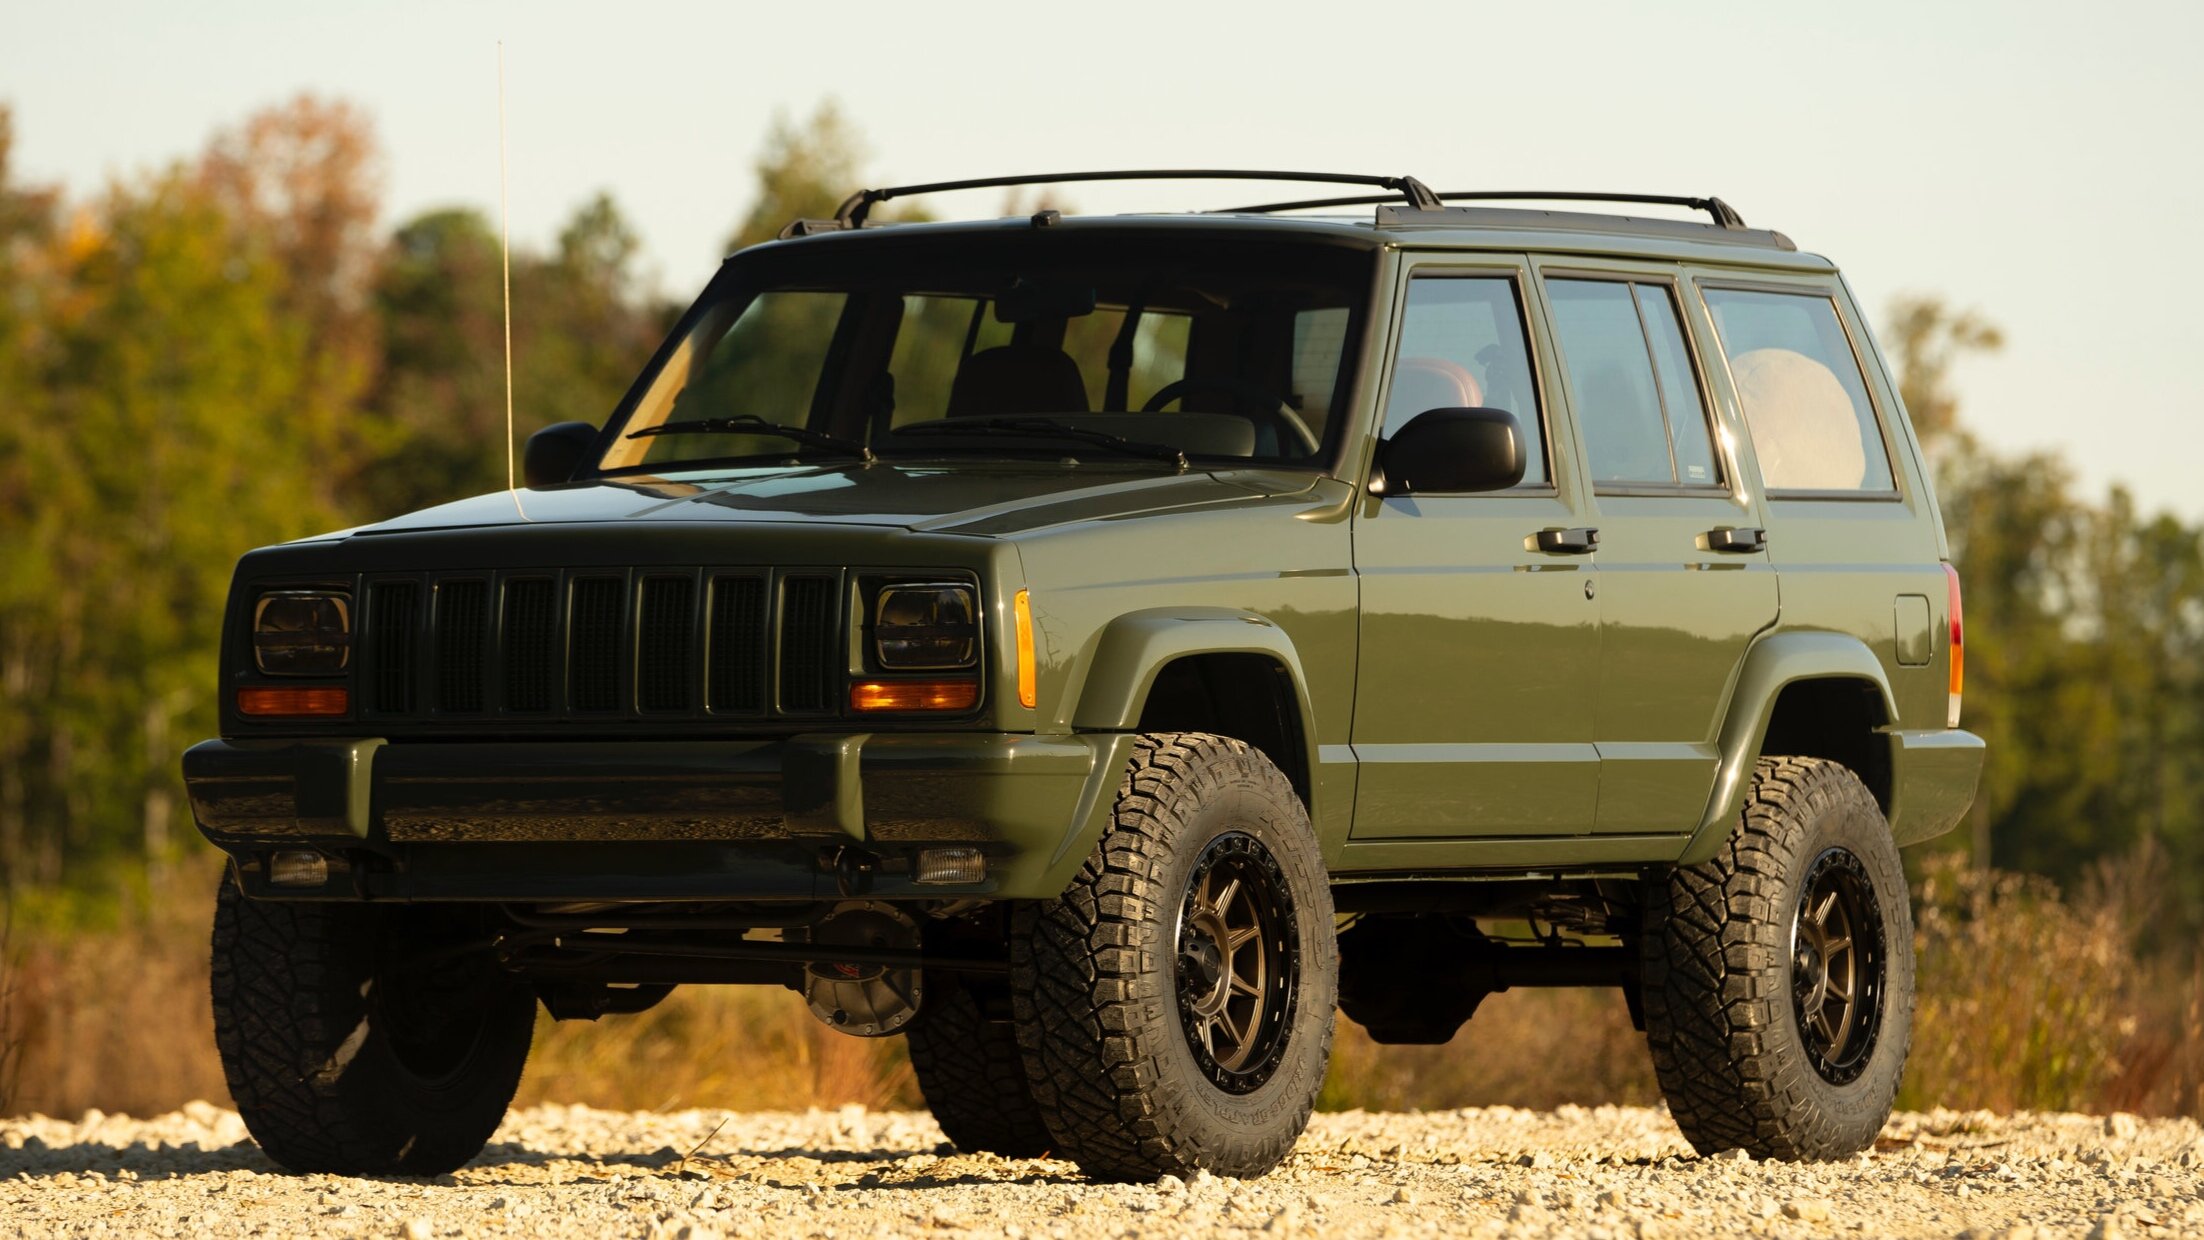 Lifted Cherokee Sport Xj For Sale Lifted Jeep Cherokee Built Jeep Cherokee Davis Autosports